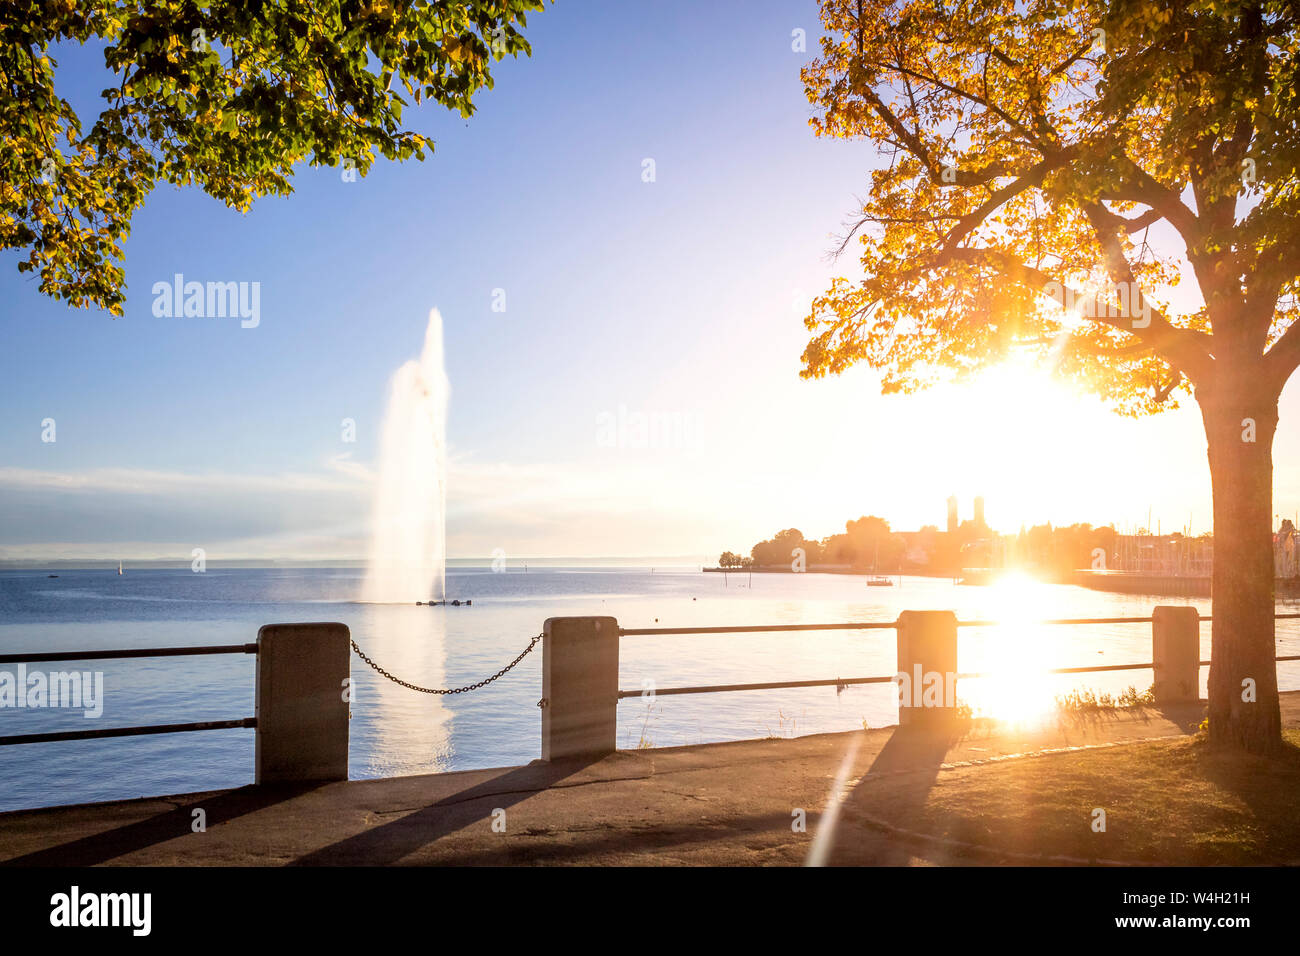 Monastery and fountain at Lake Constance, Friedrichshafen, Germany Stock Photo